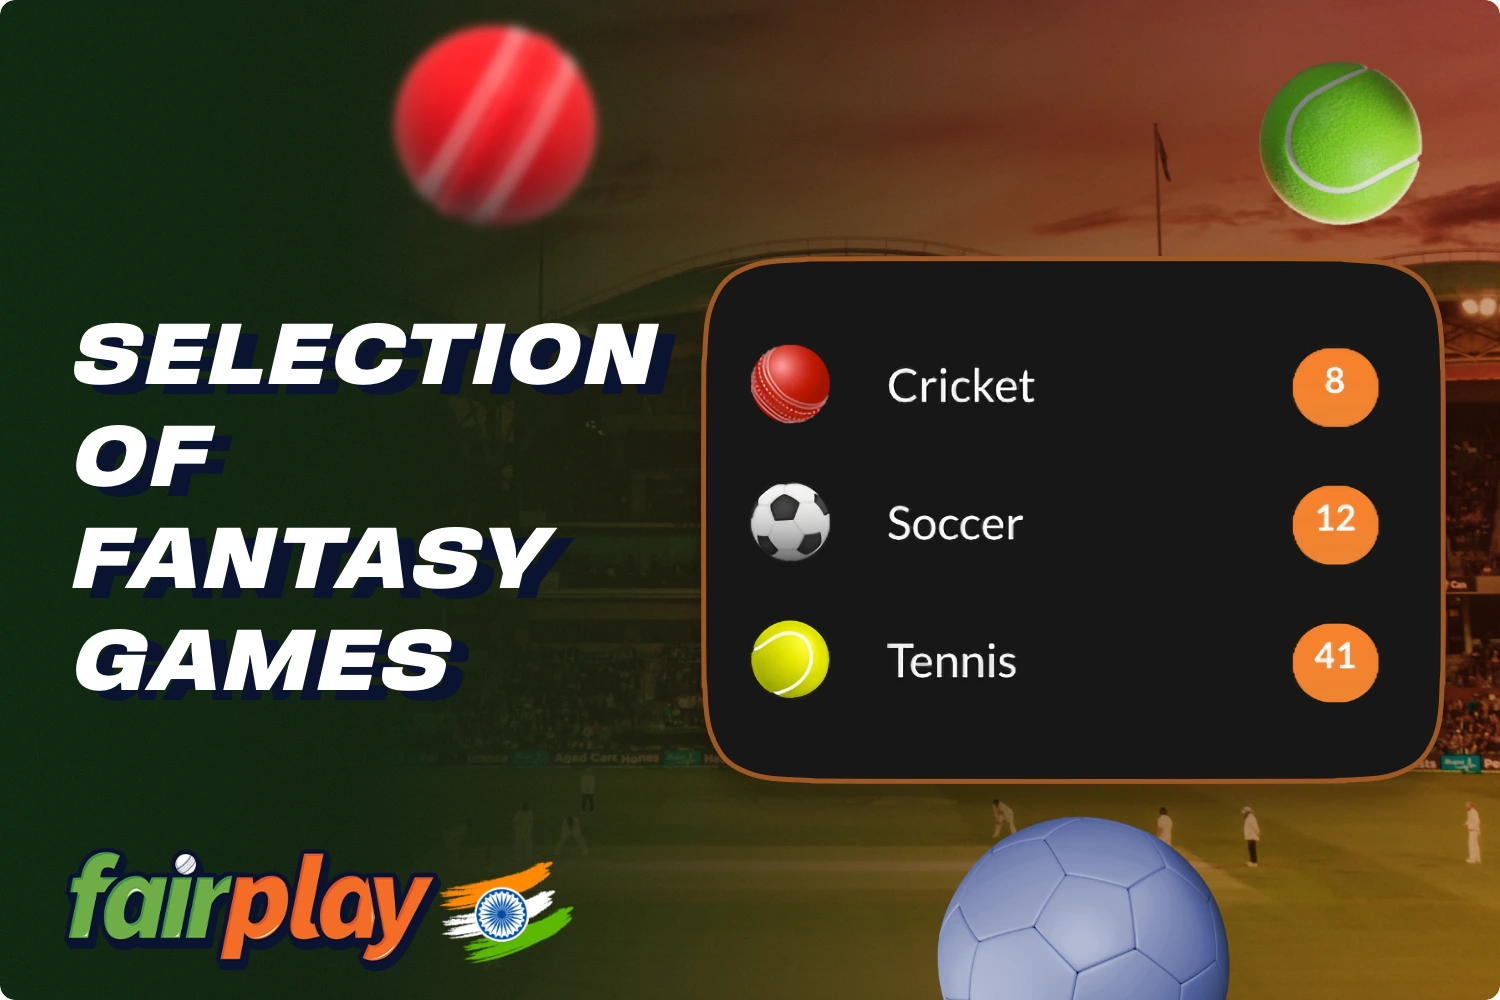 At Fairplay you can bet on several types of fantasy sports